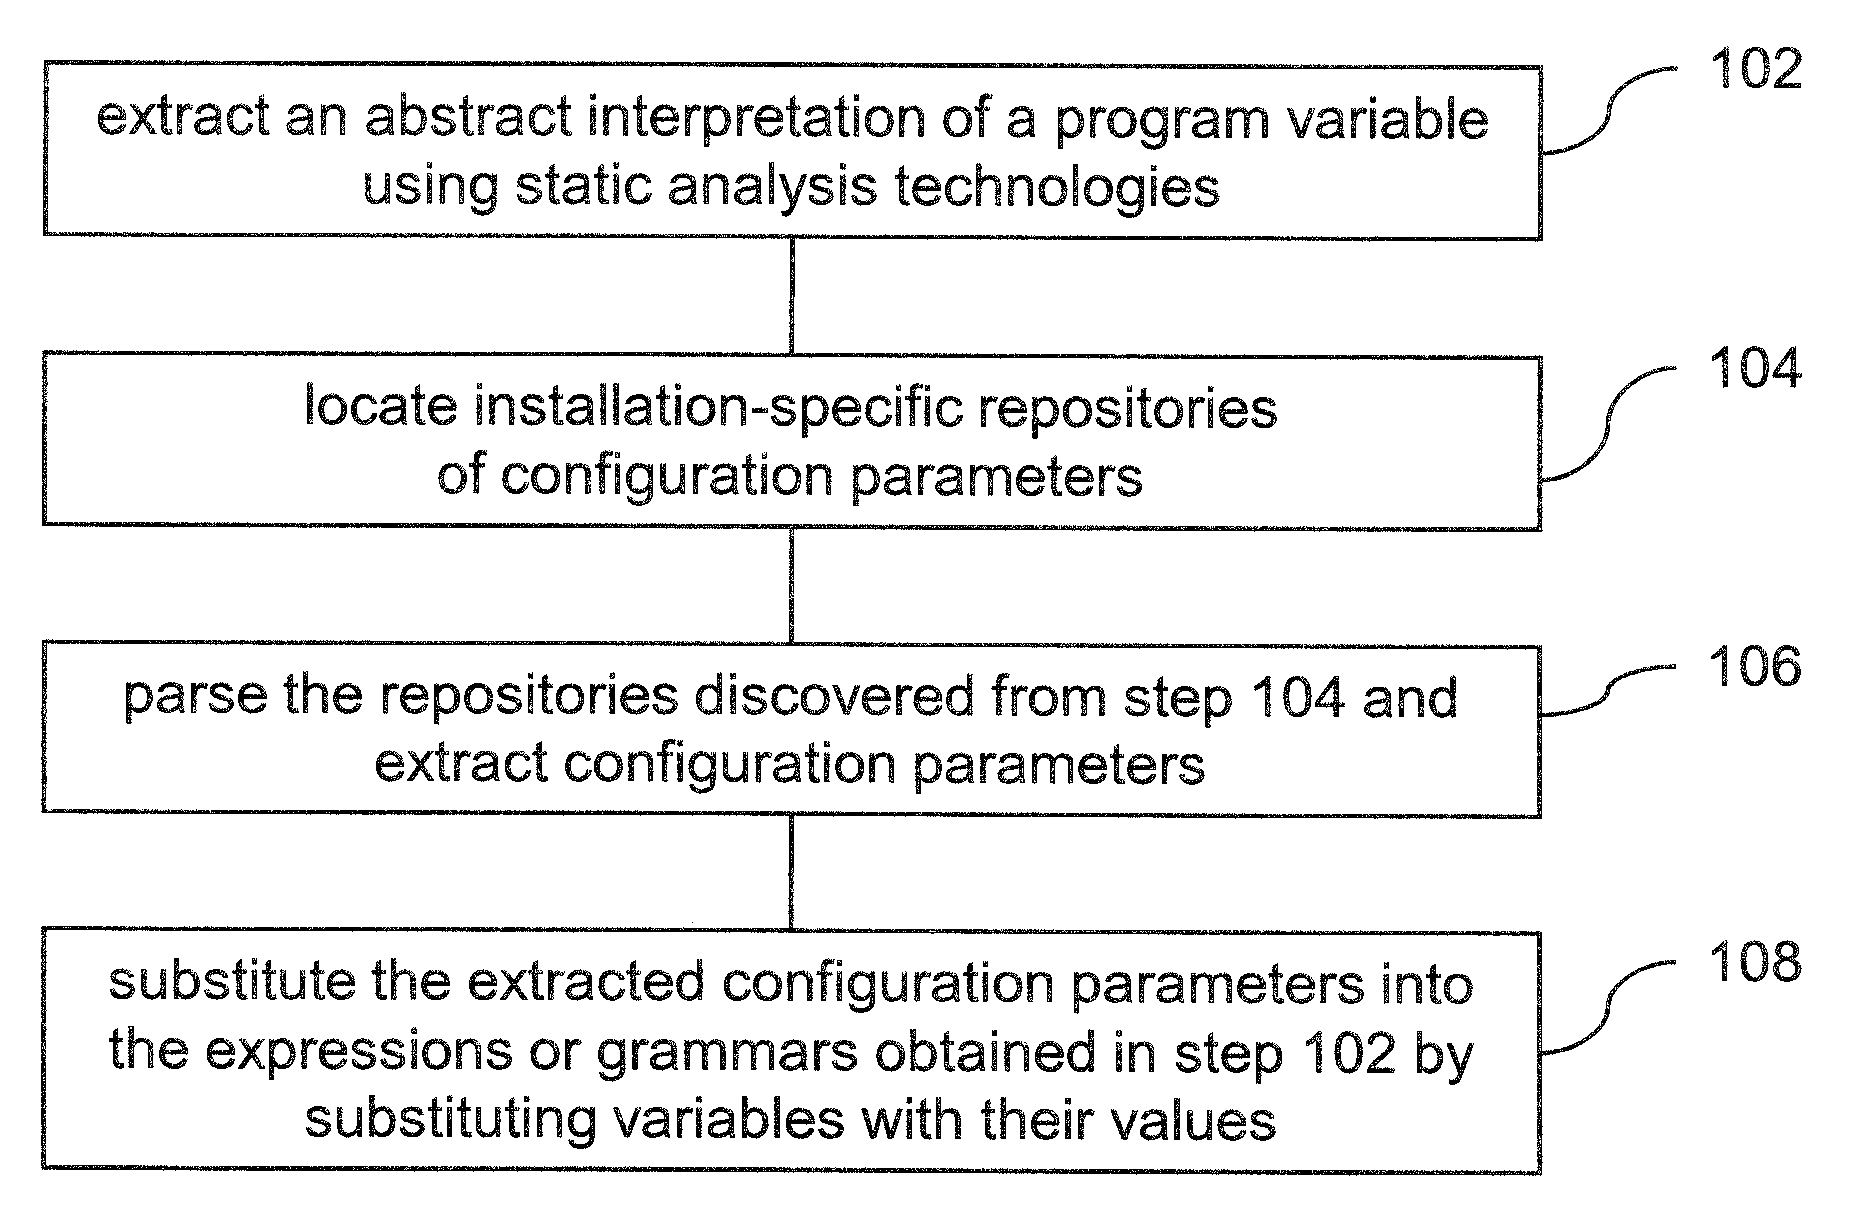 Method and system to discover possible program variable values by connecting program value extraction with external data sources